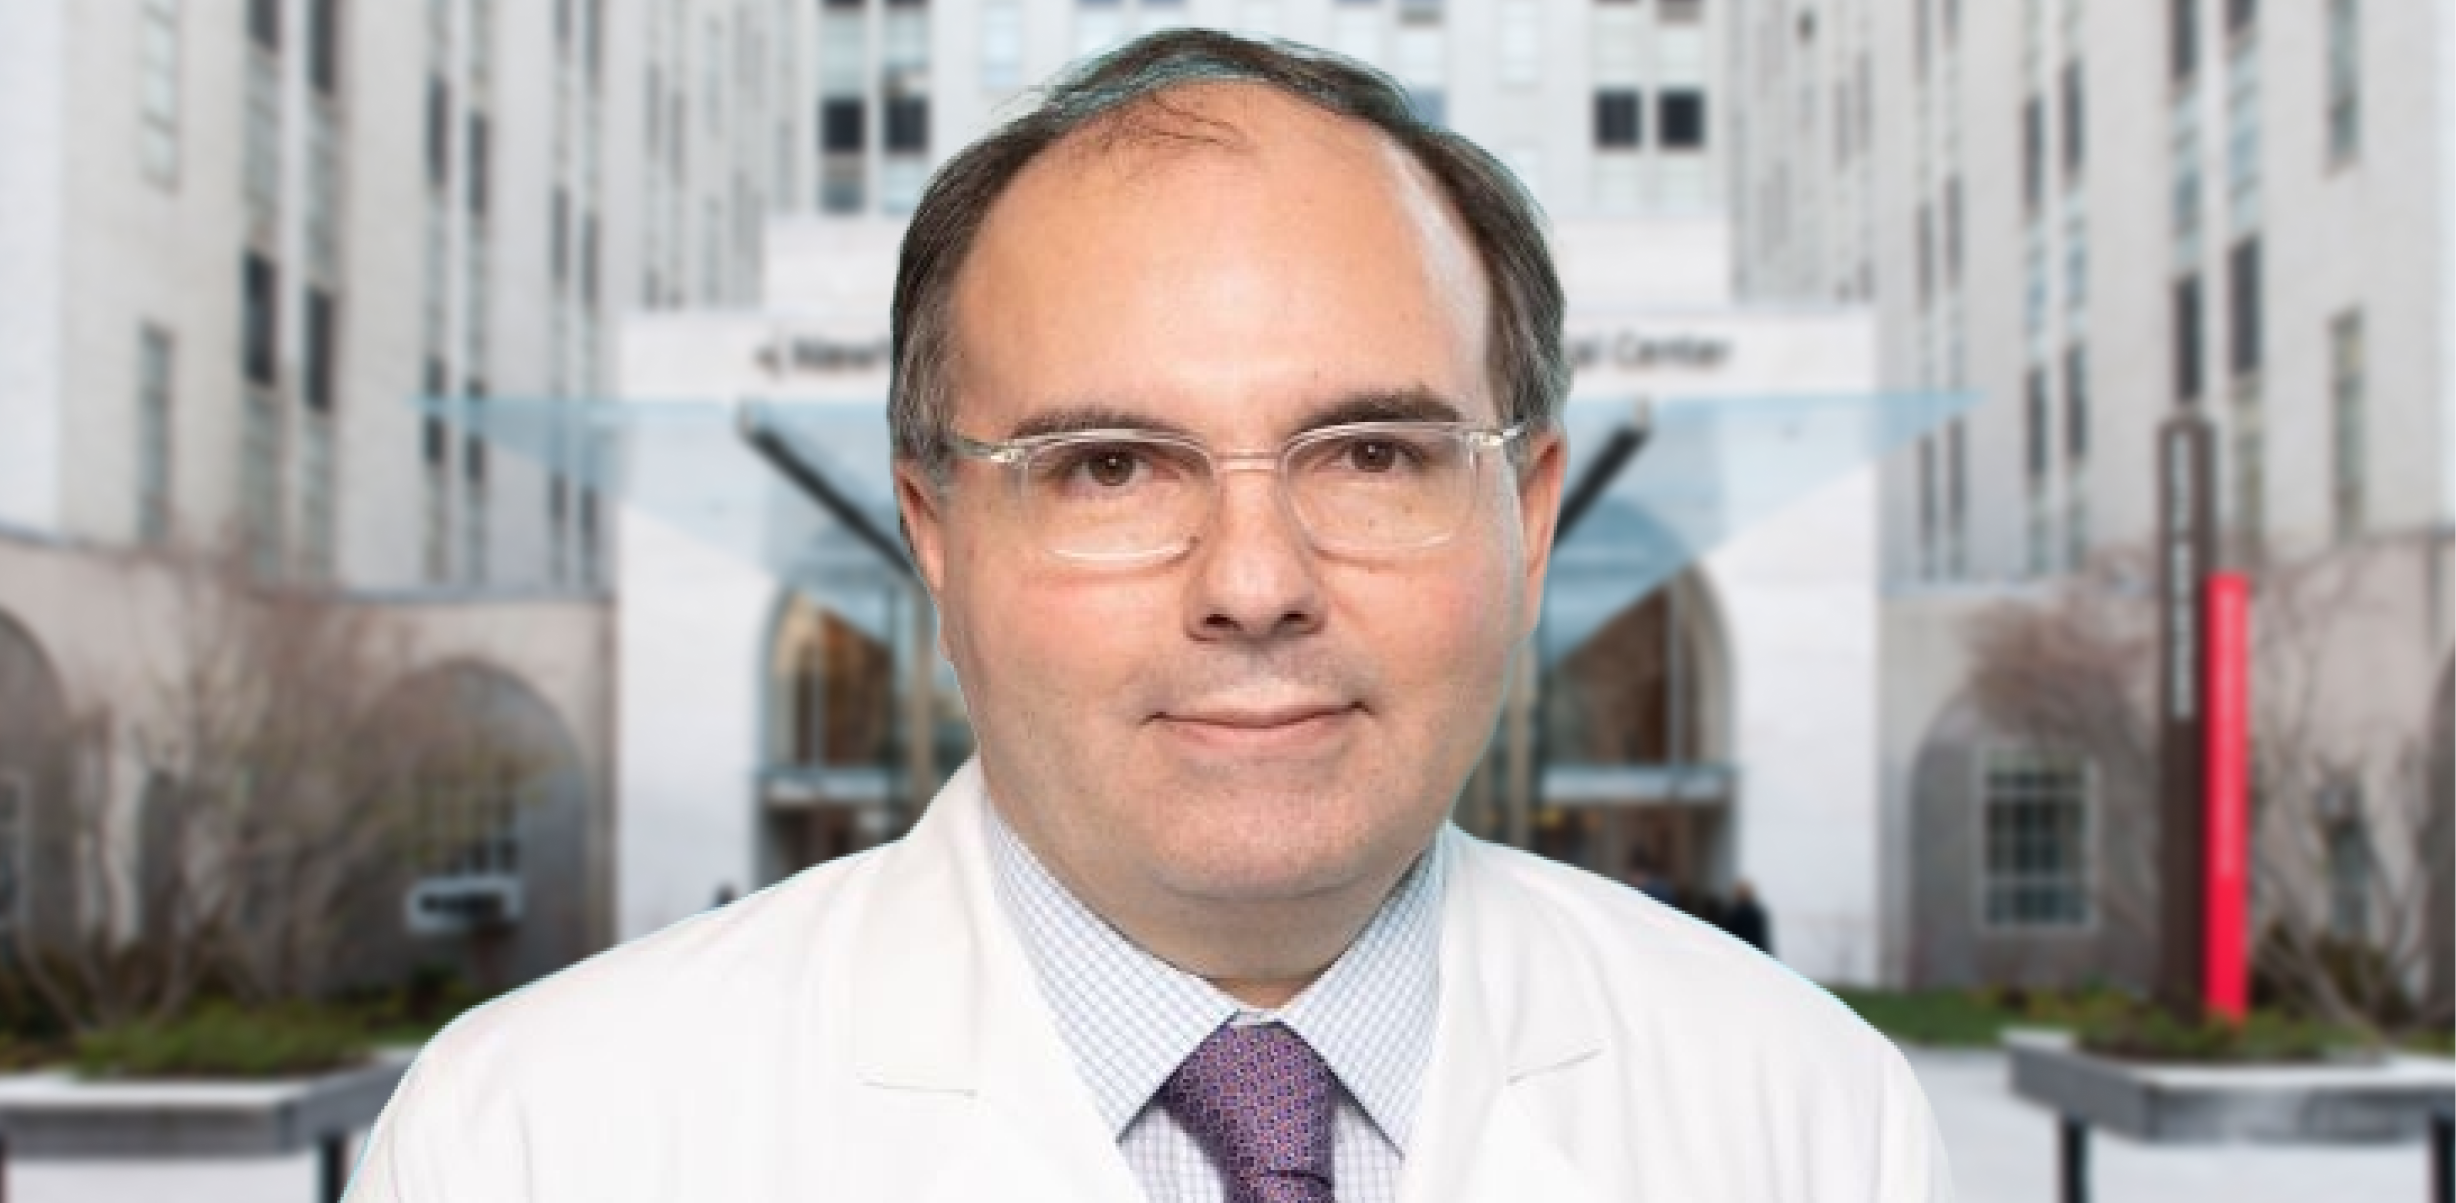 Dr. Juan Pascual, in a white coat and tie, with Weill Cornell Medicine and New York Presbyterian Hospital in the background